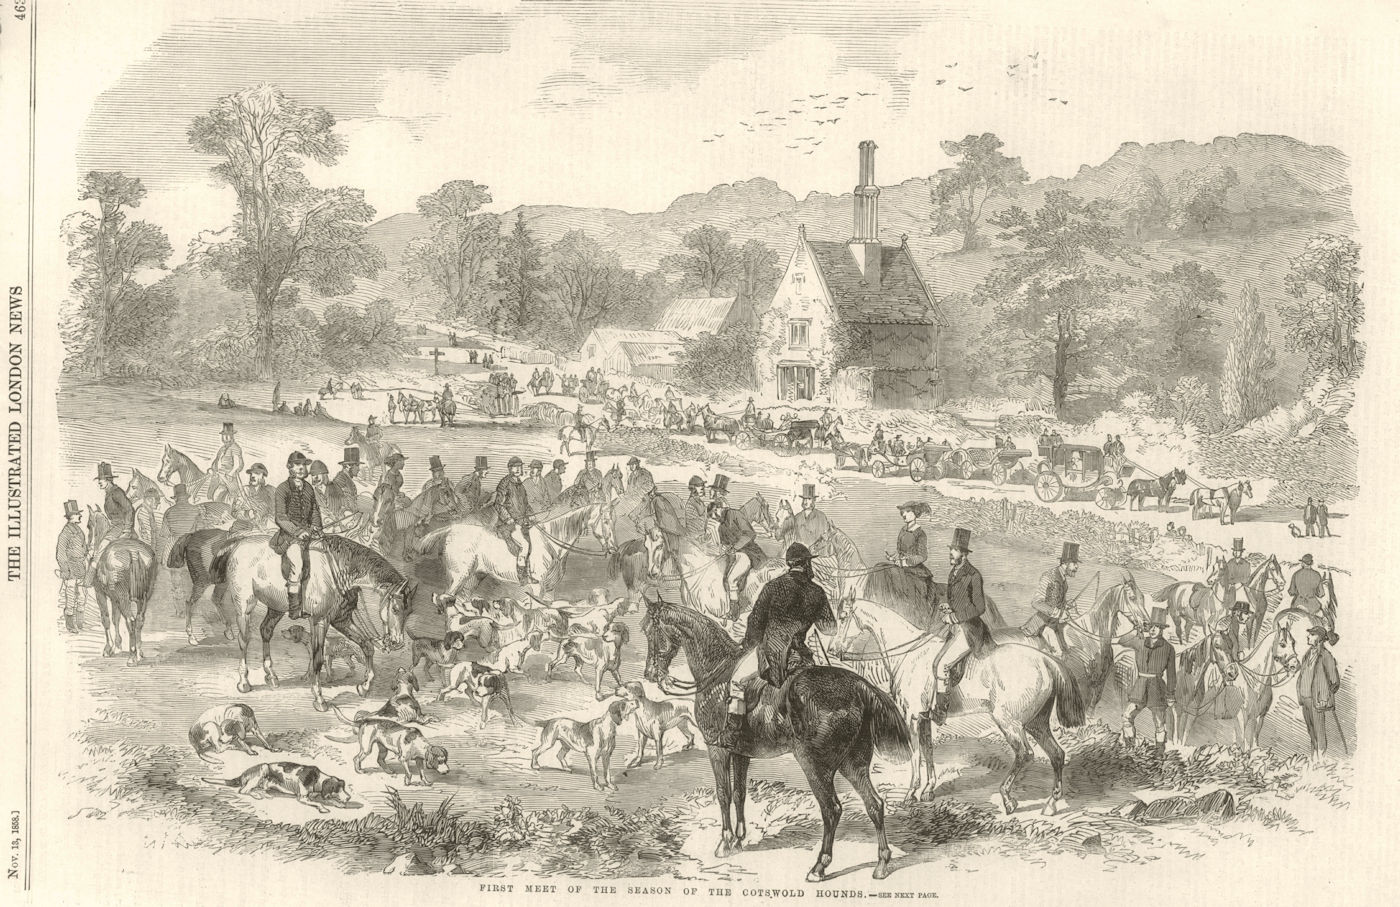 Associate Product First meet of the season of the Cotswold Hounds. Cotswolds 1858 print